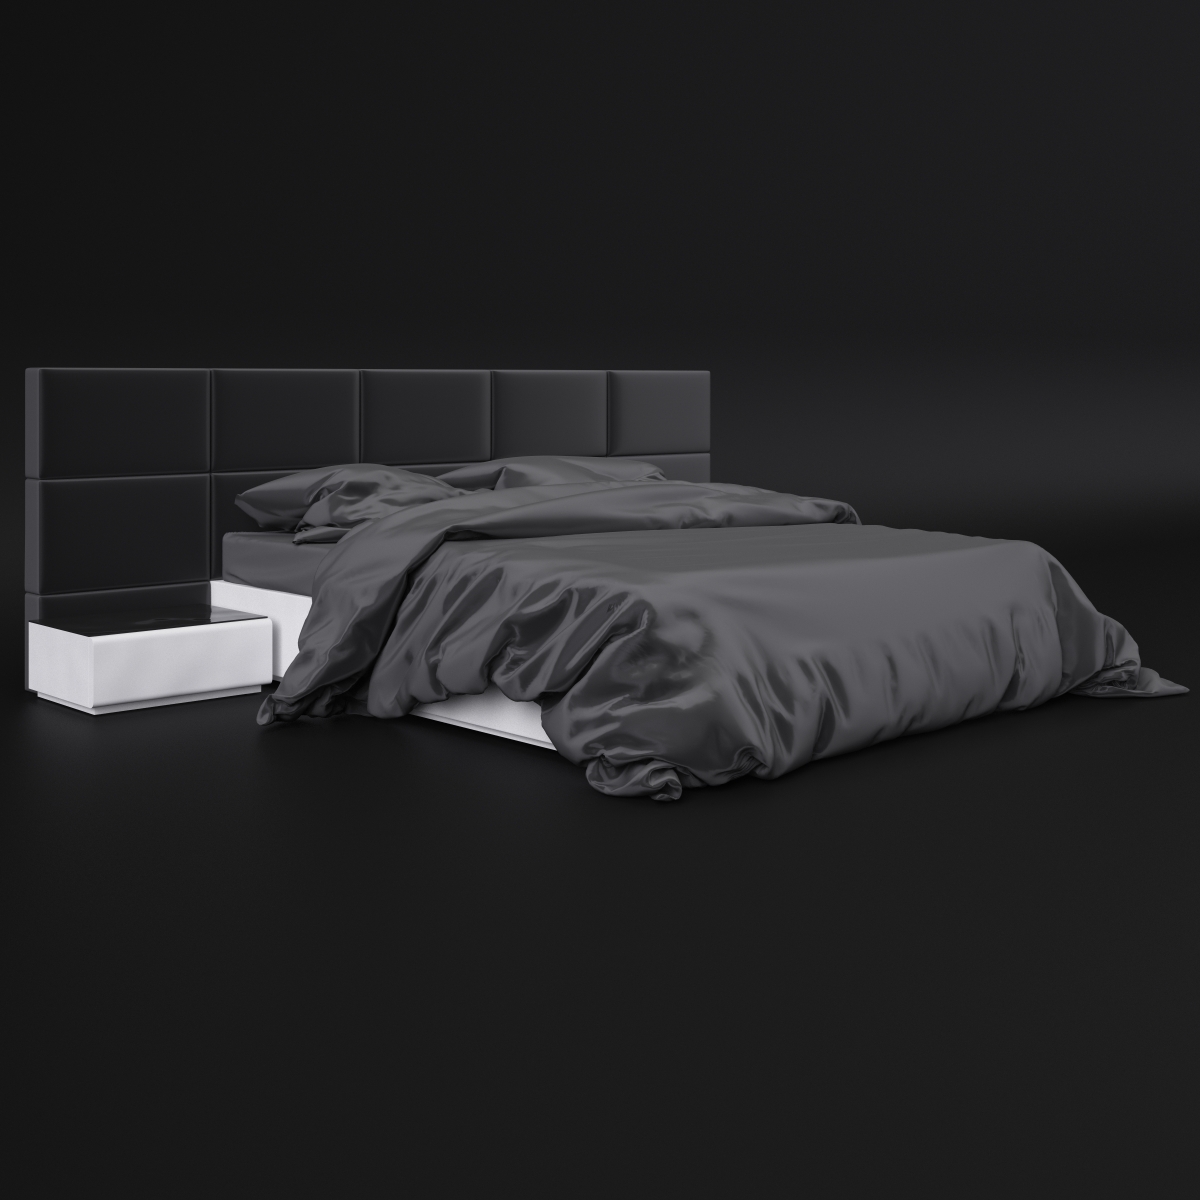 3d-modeling-and-visualisation-bed